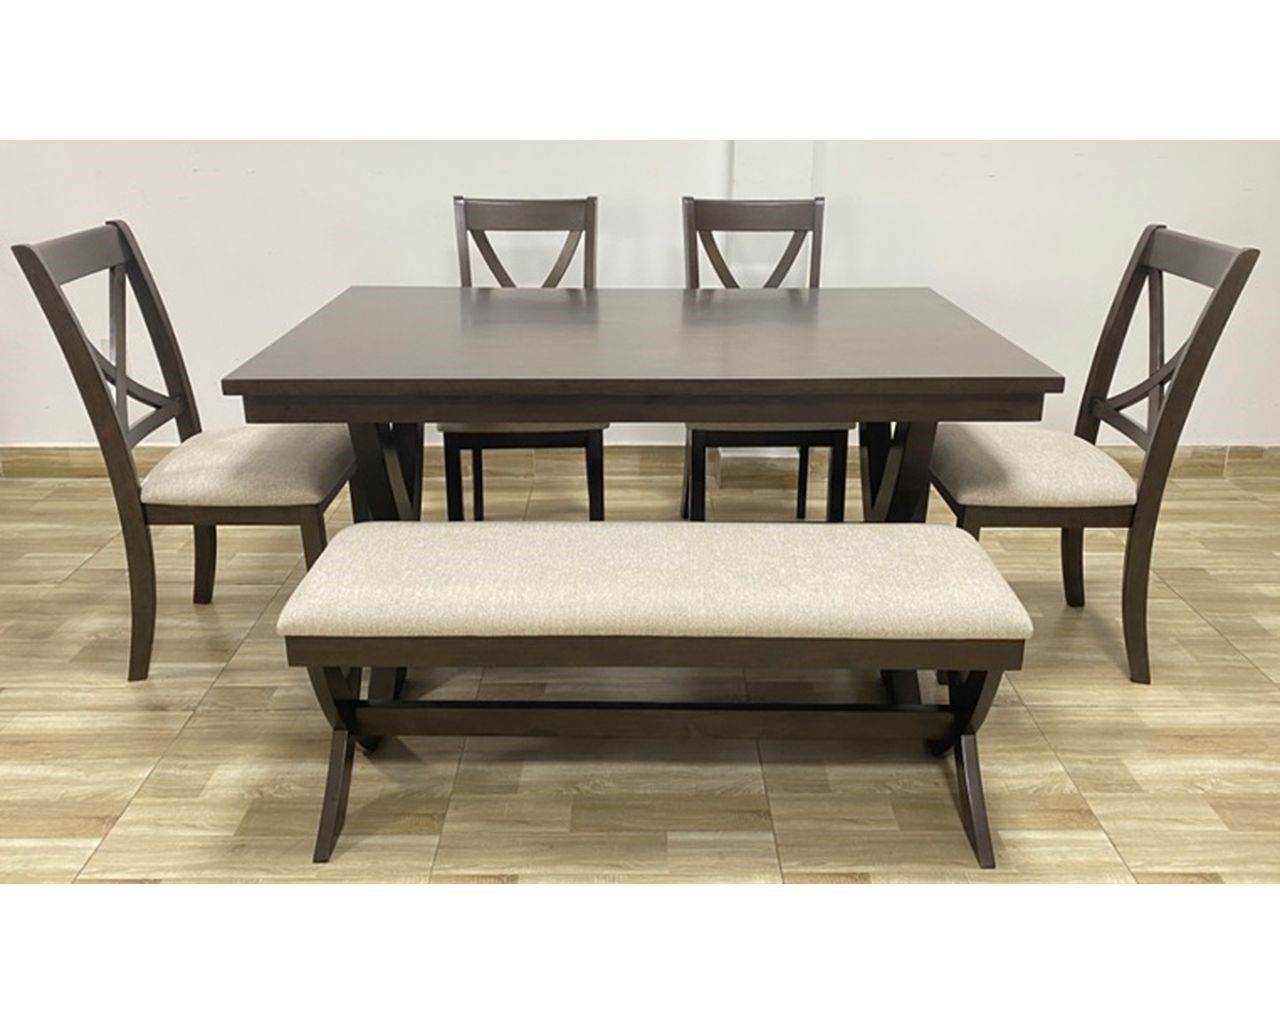 Mason Dining Table with 4 Chairs and a Bench